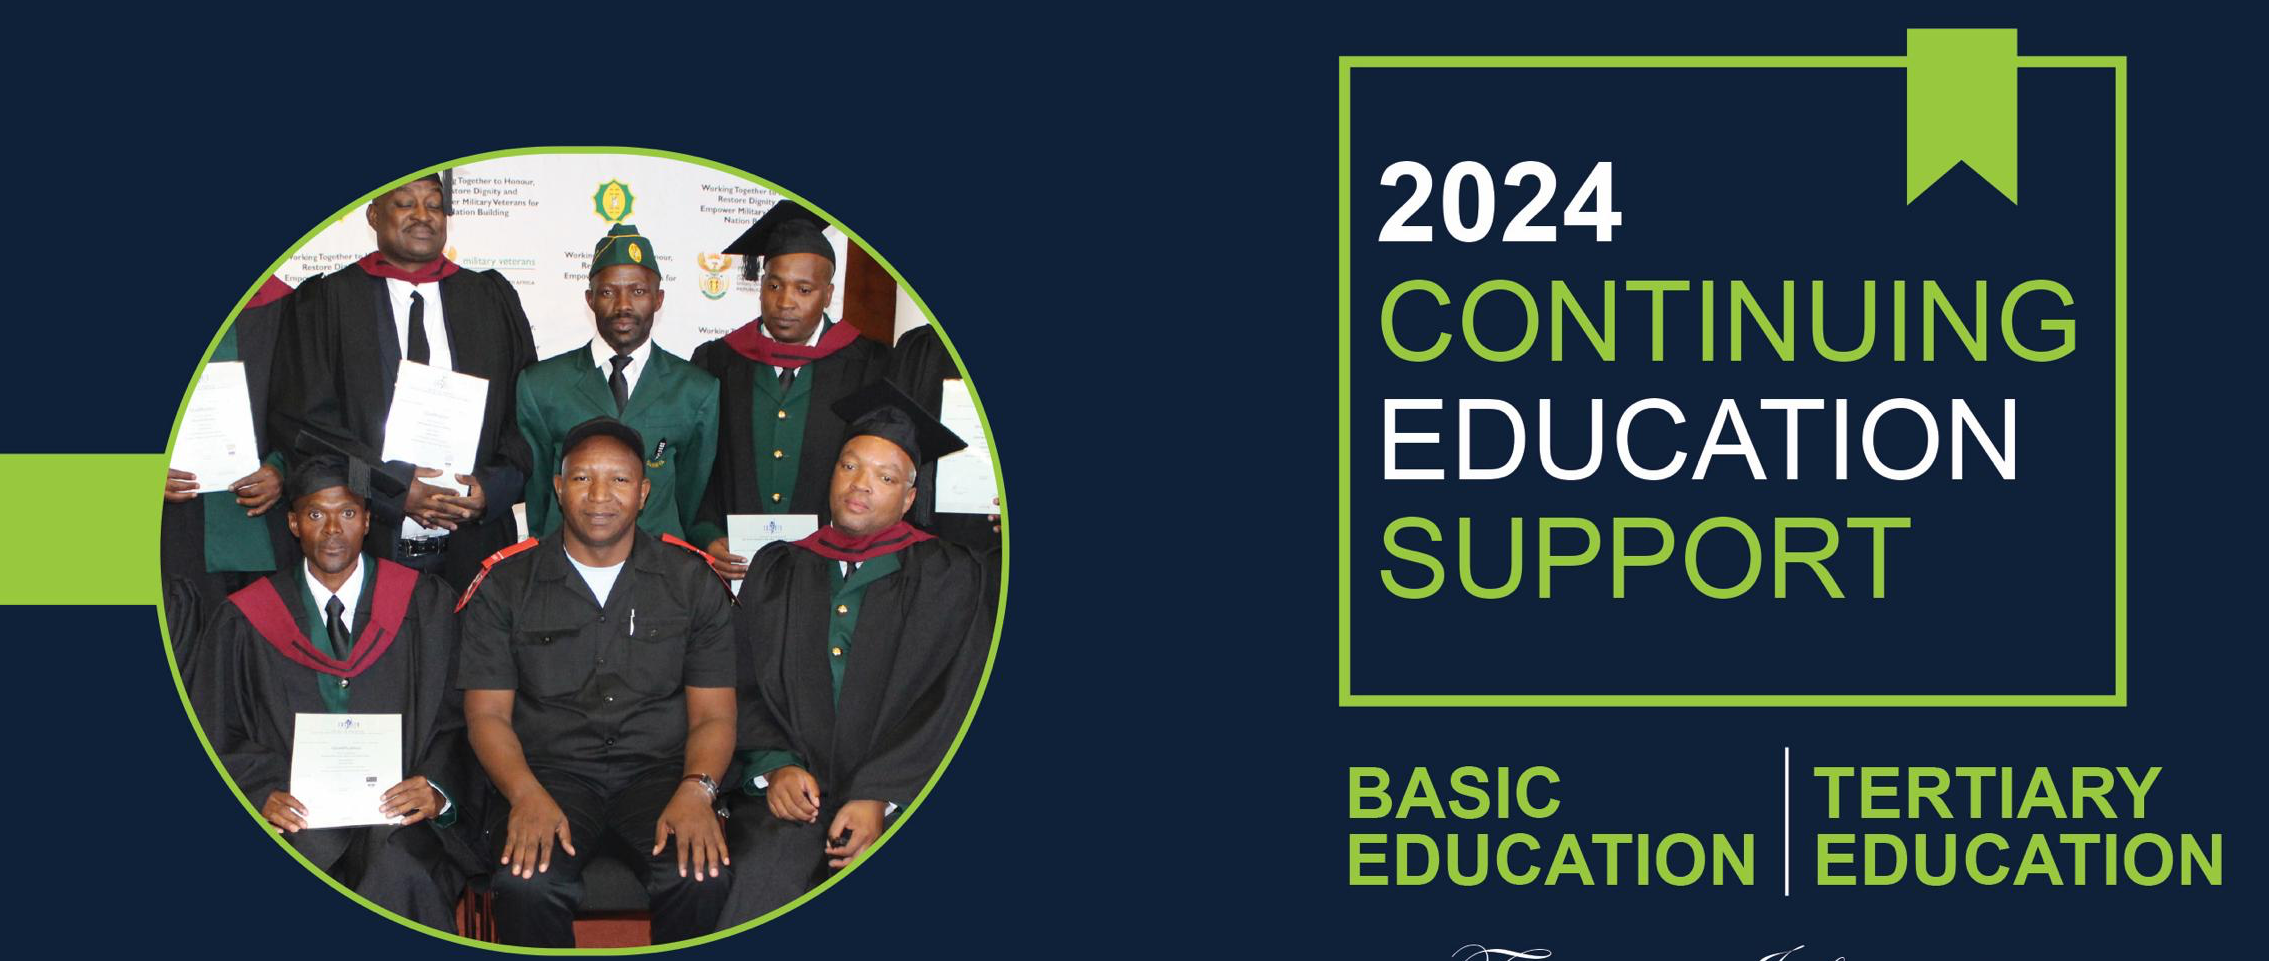 Education Support 2024